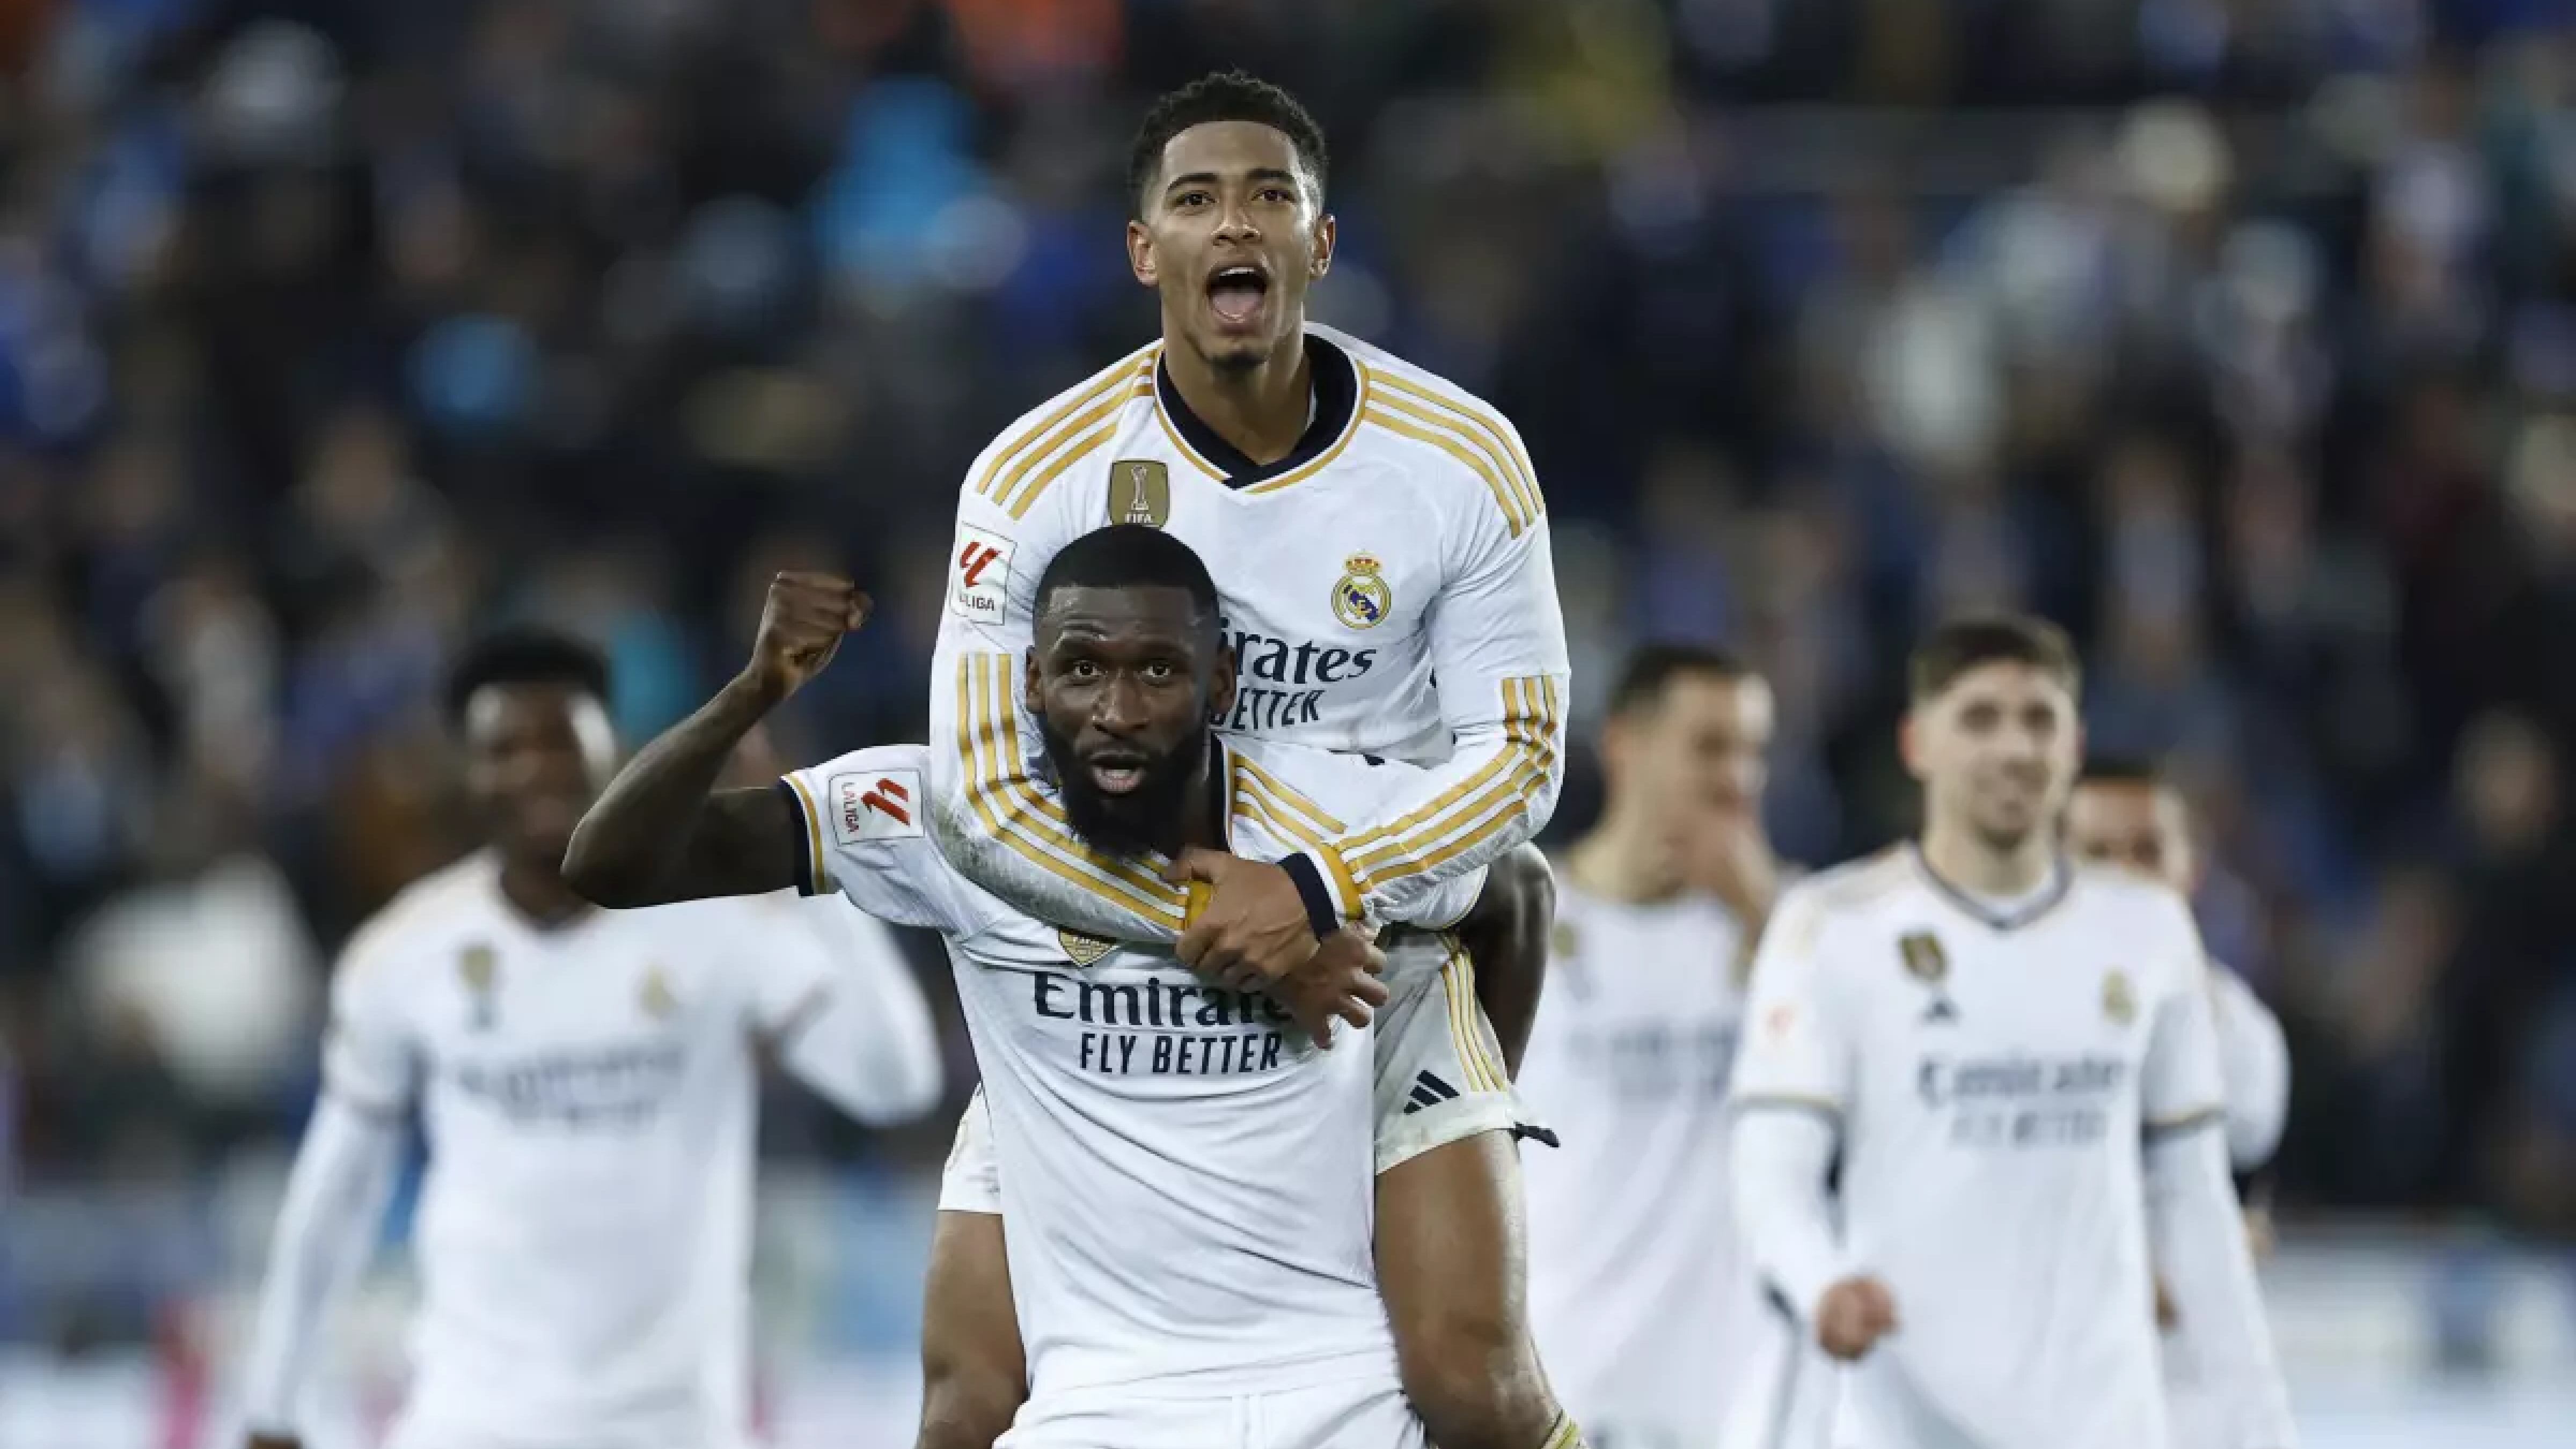 It's cold at the top, Real Madrid demonstrates its tremendous power in Europe